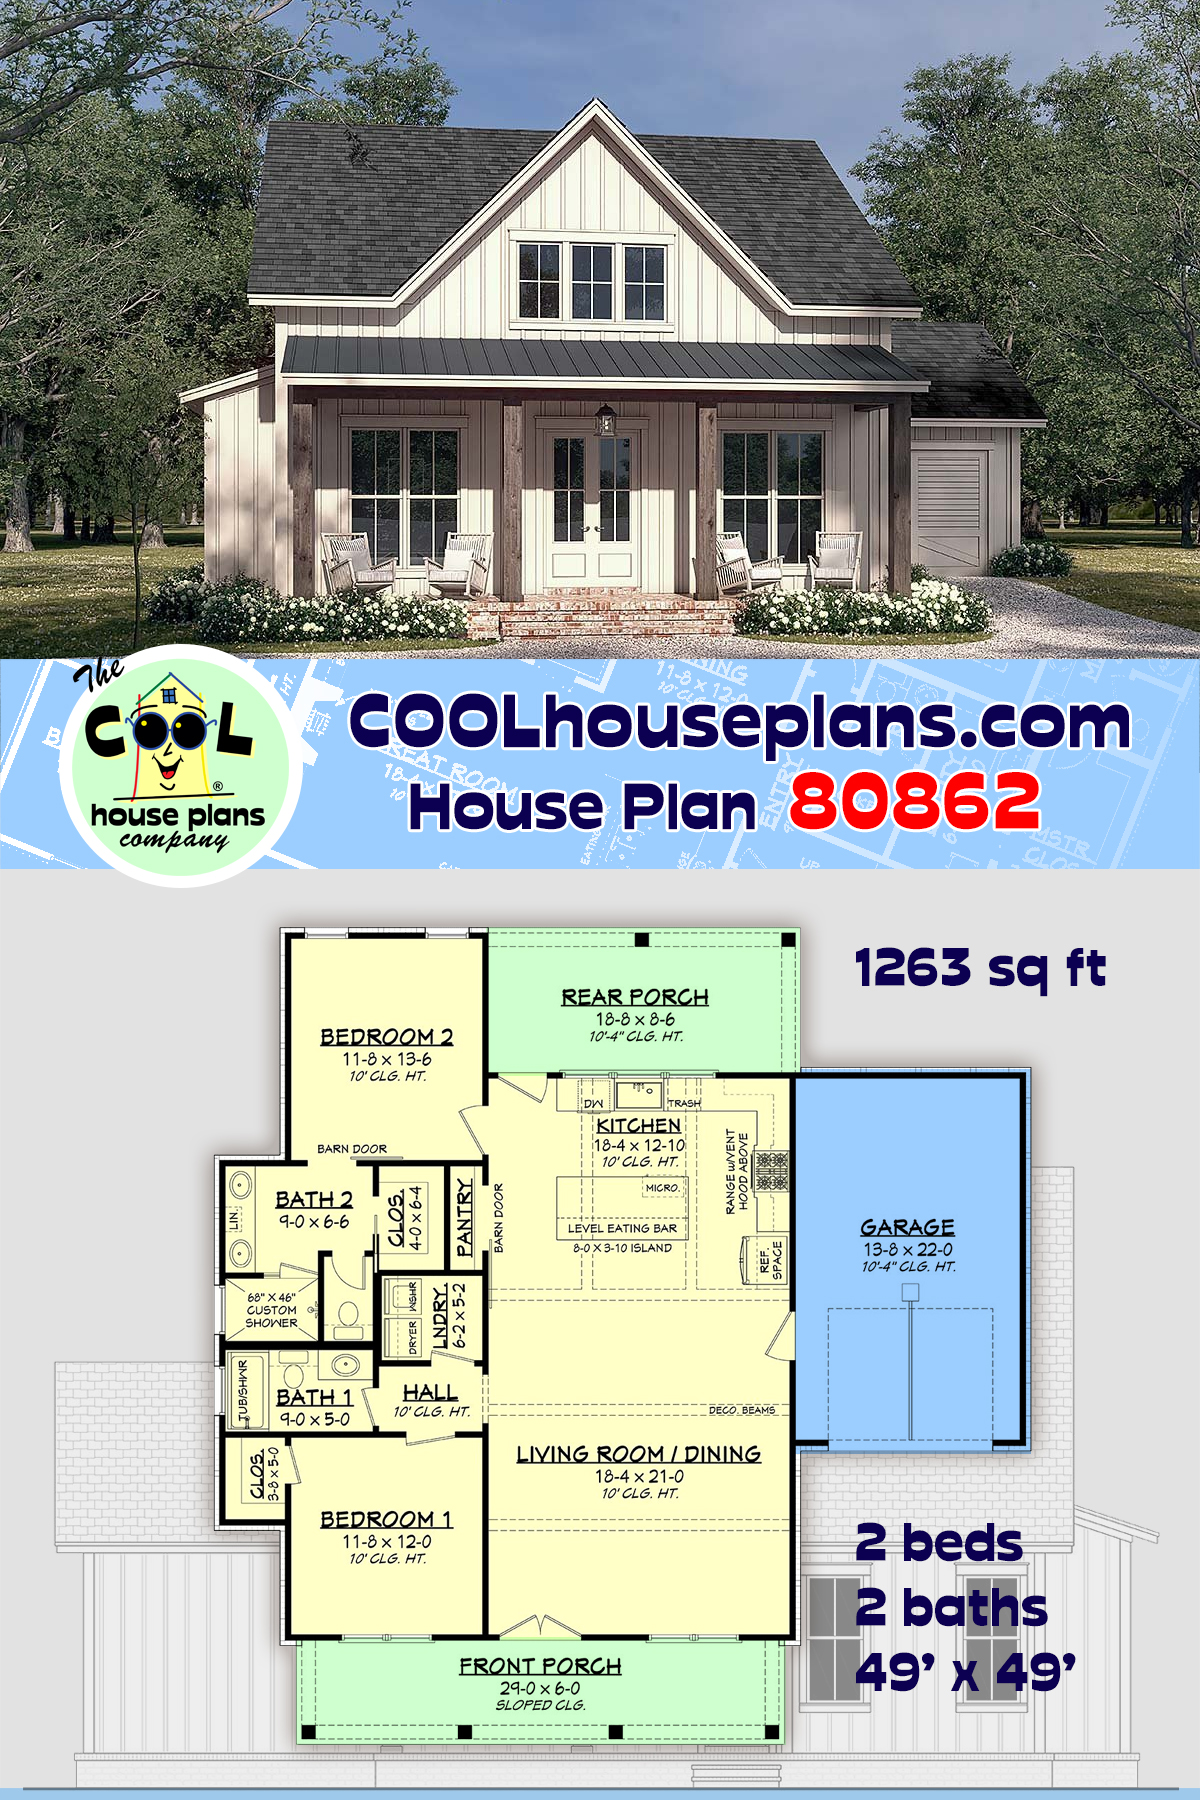 Country, Farmhouse, Traditional House Plan 80862 with 2 Beds, 2 Baths, 1 Car Garage